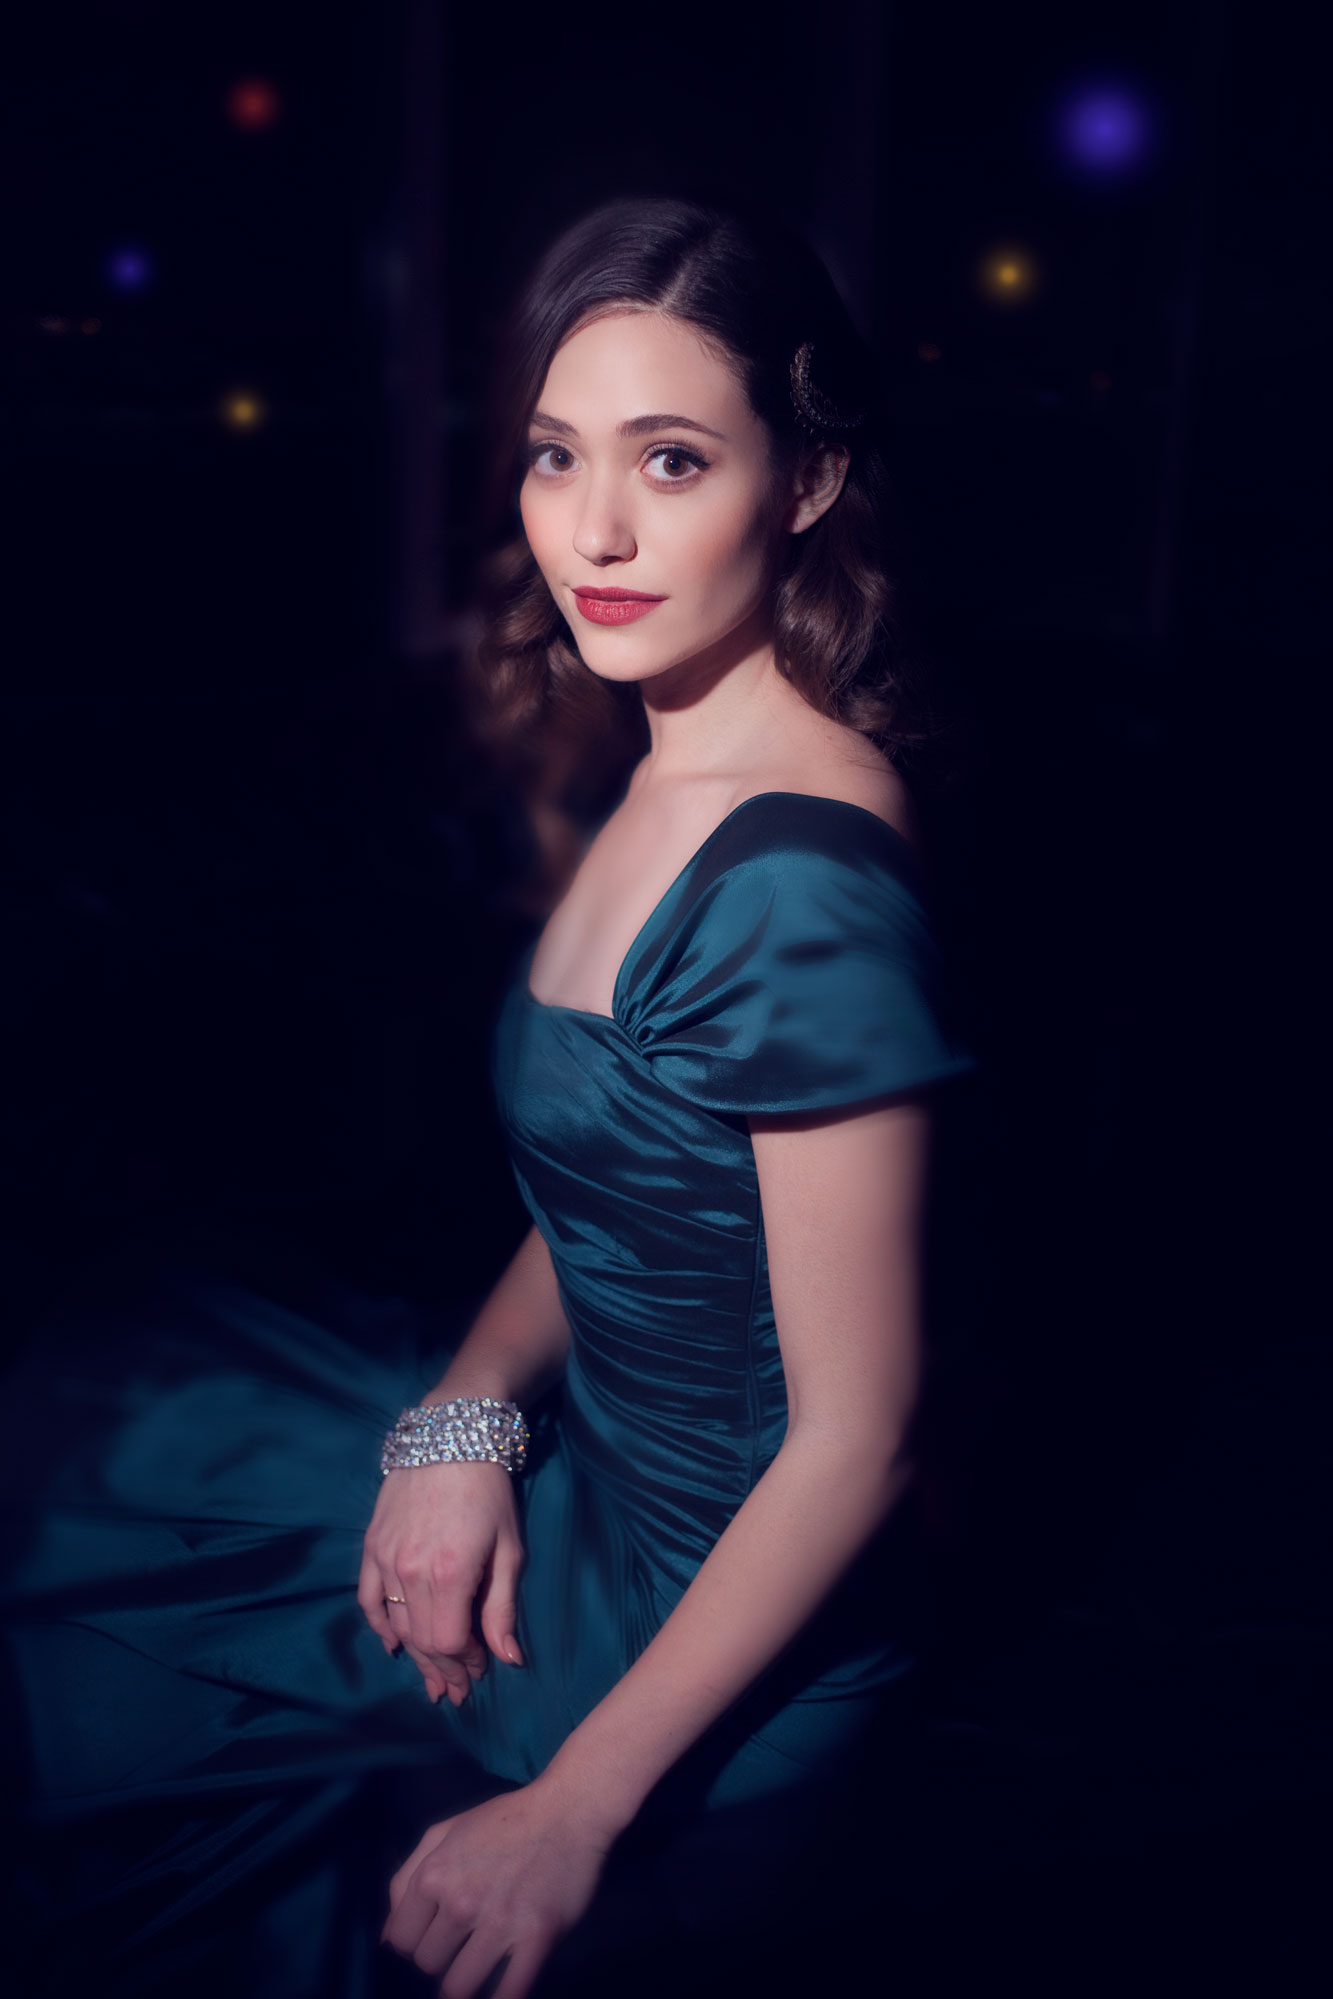 Editorial photography of Emmy Rossum for Manhattan Magazine by Jeff Fried